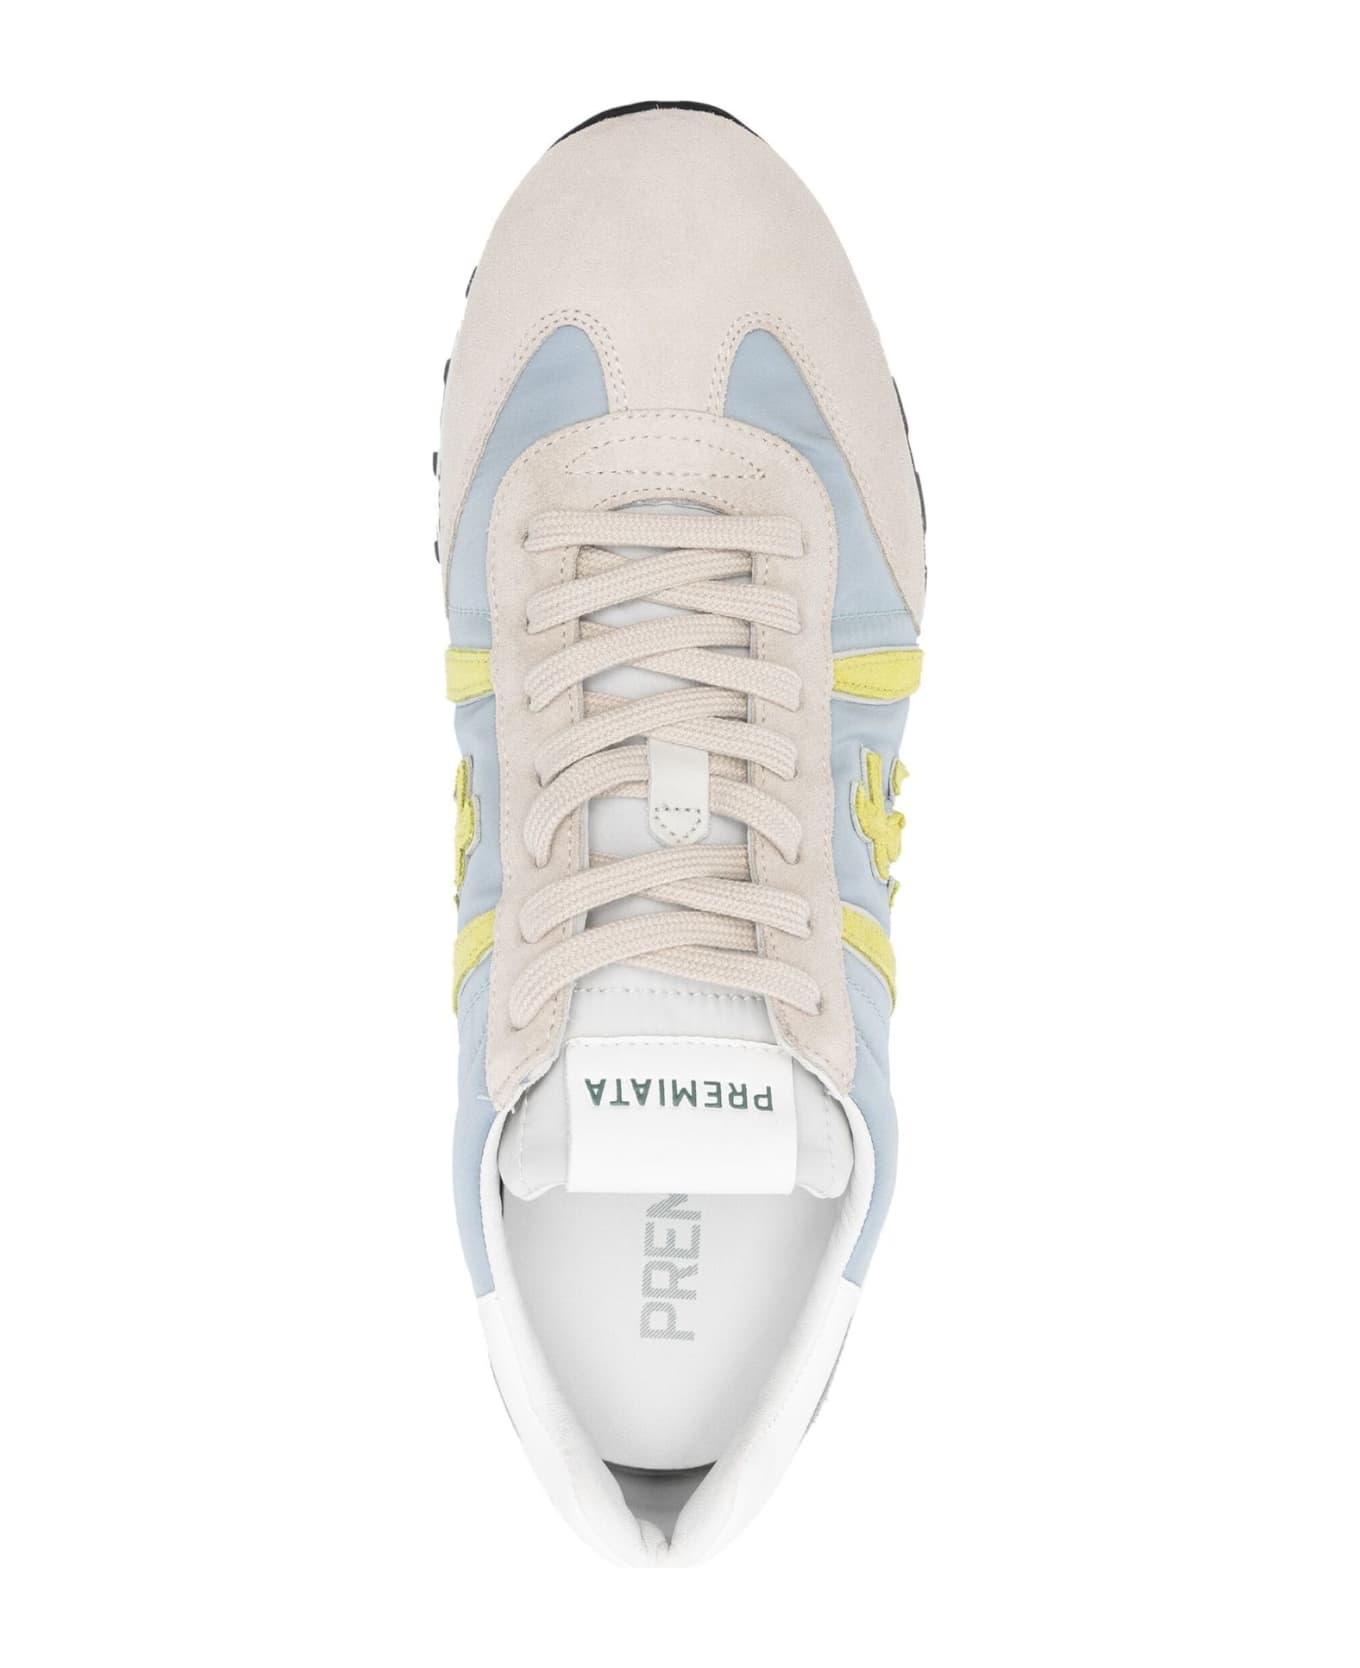 Premiata Lucy 6619 Beige And Blue Sneakers - Beige